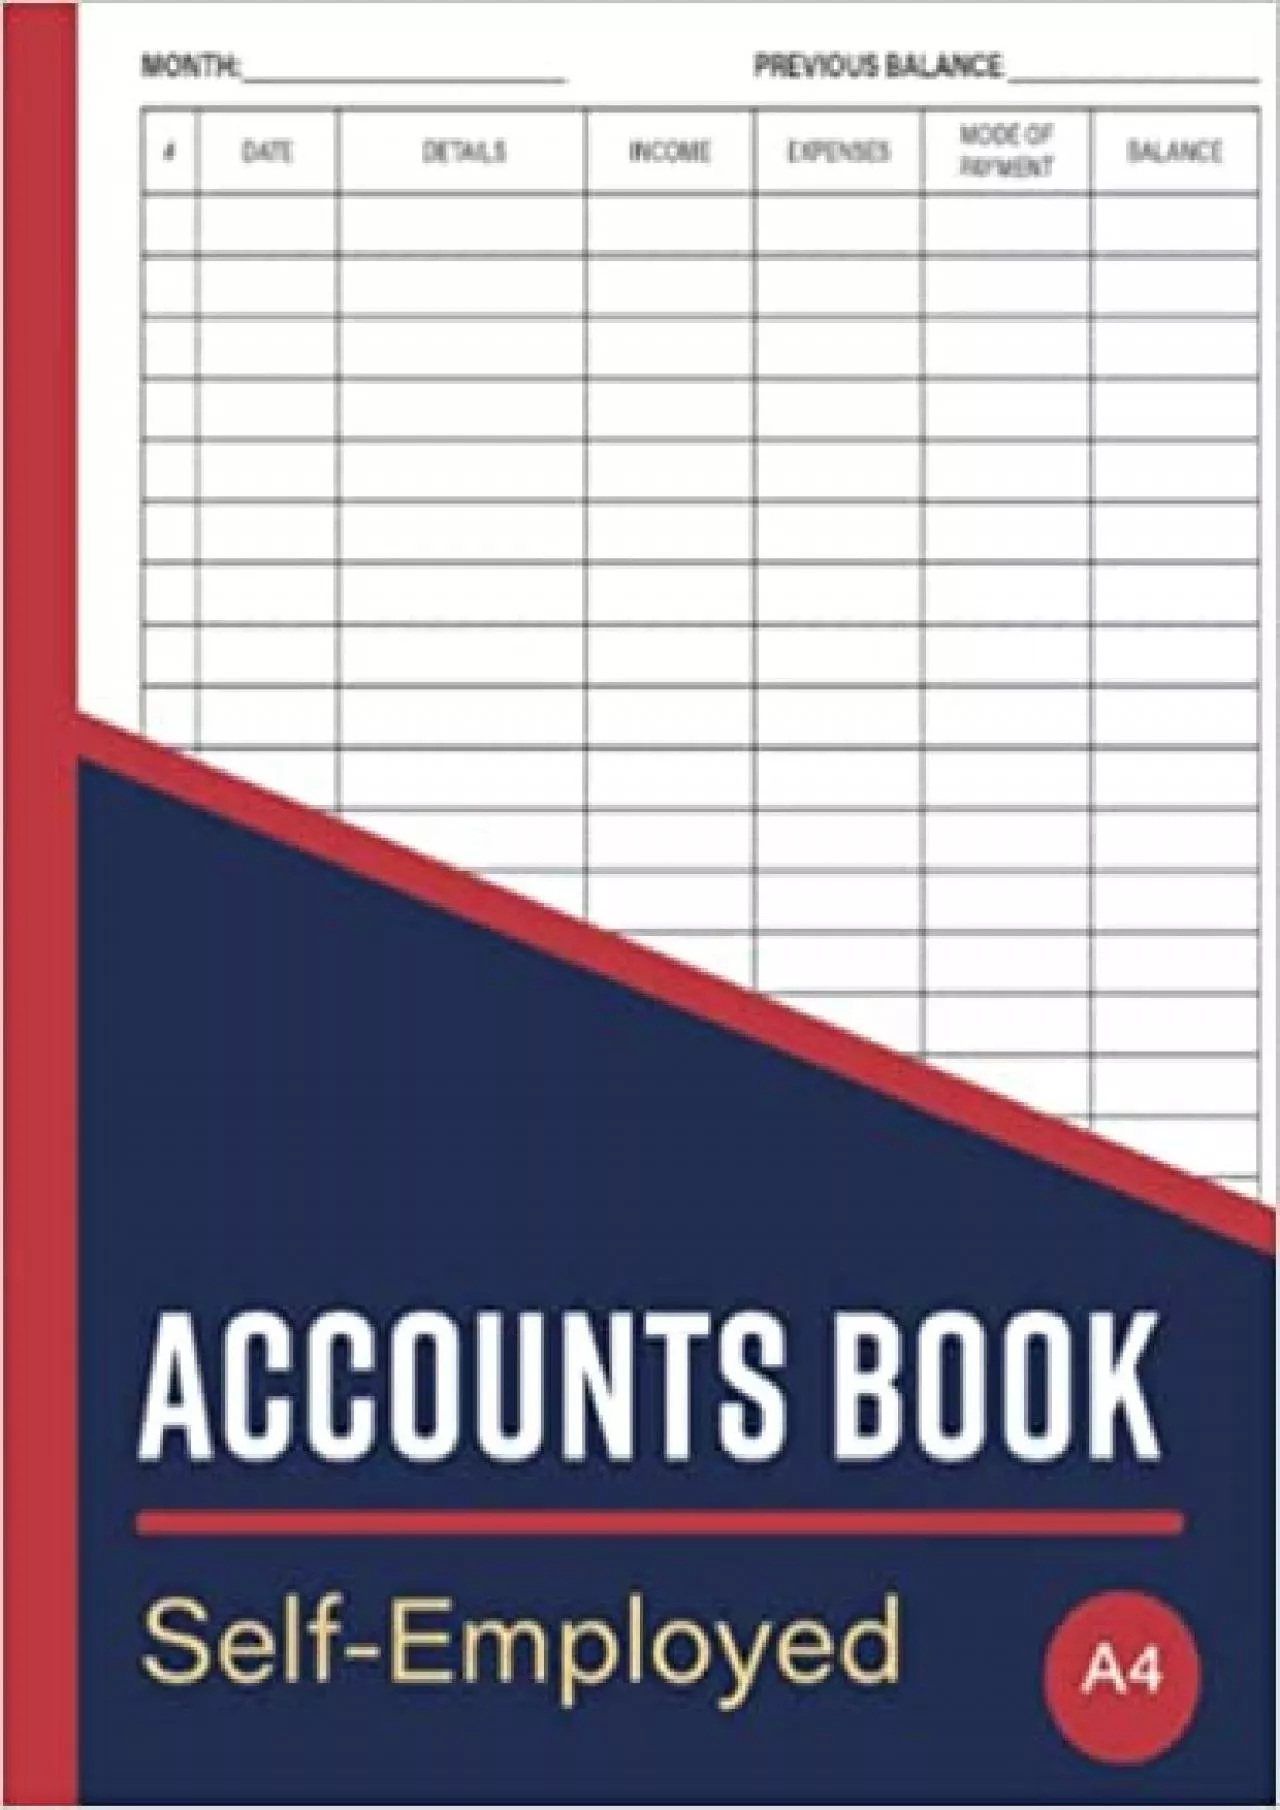 Accounts Book Self Employed: Accounting Ledger Book A4 Register | Income & Expense Bookkeeping